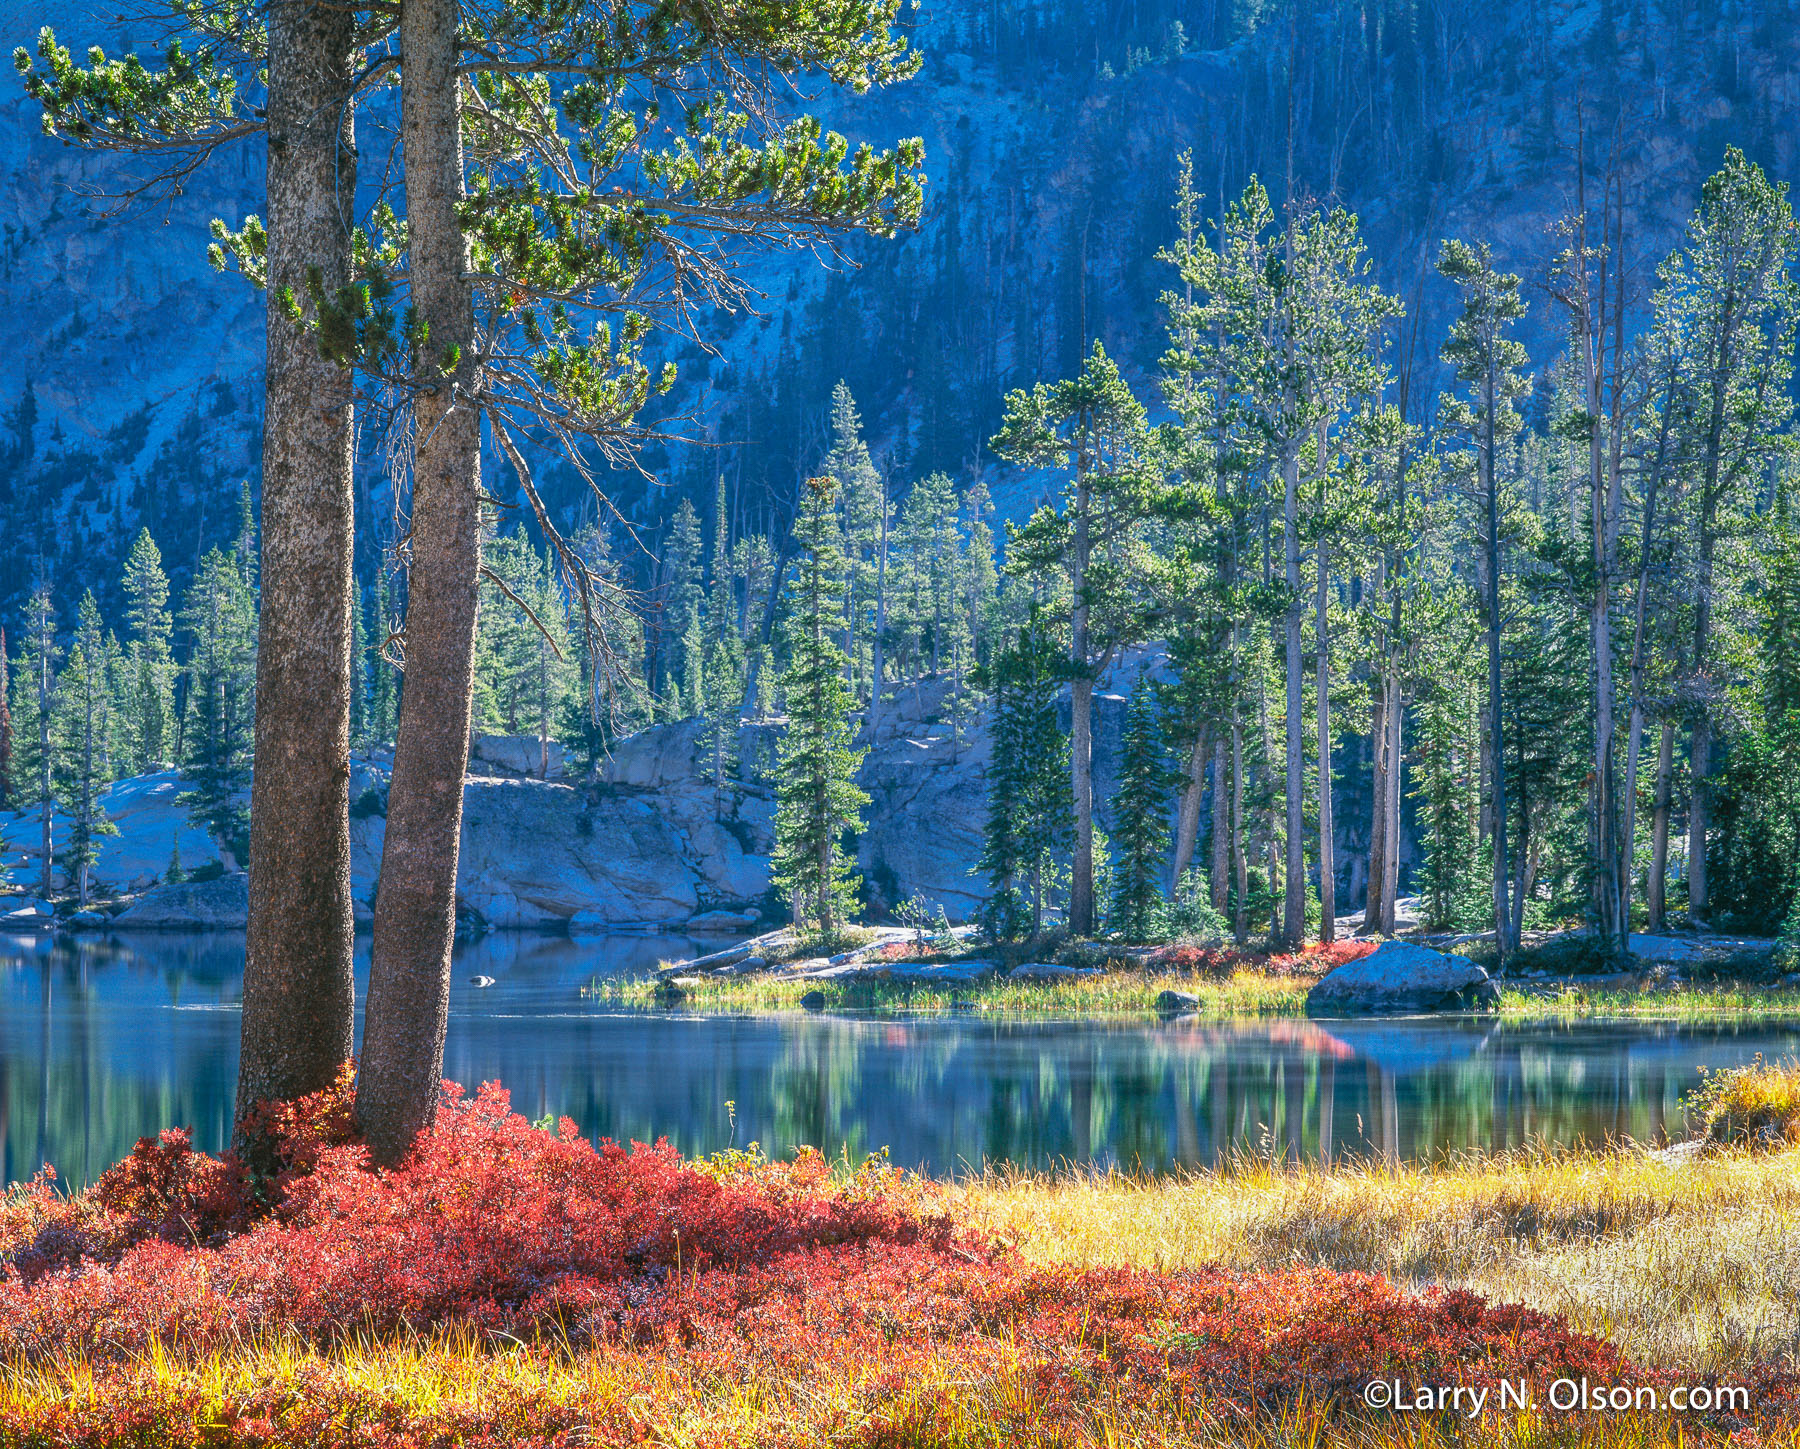 Imogene Lake, Sawtooth Mountains Wilderness, ID | October temperatures turn the Huckelberry scarlet red and the grasses golden.